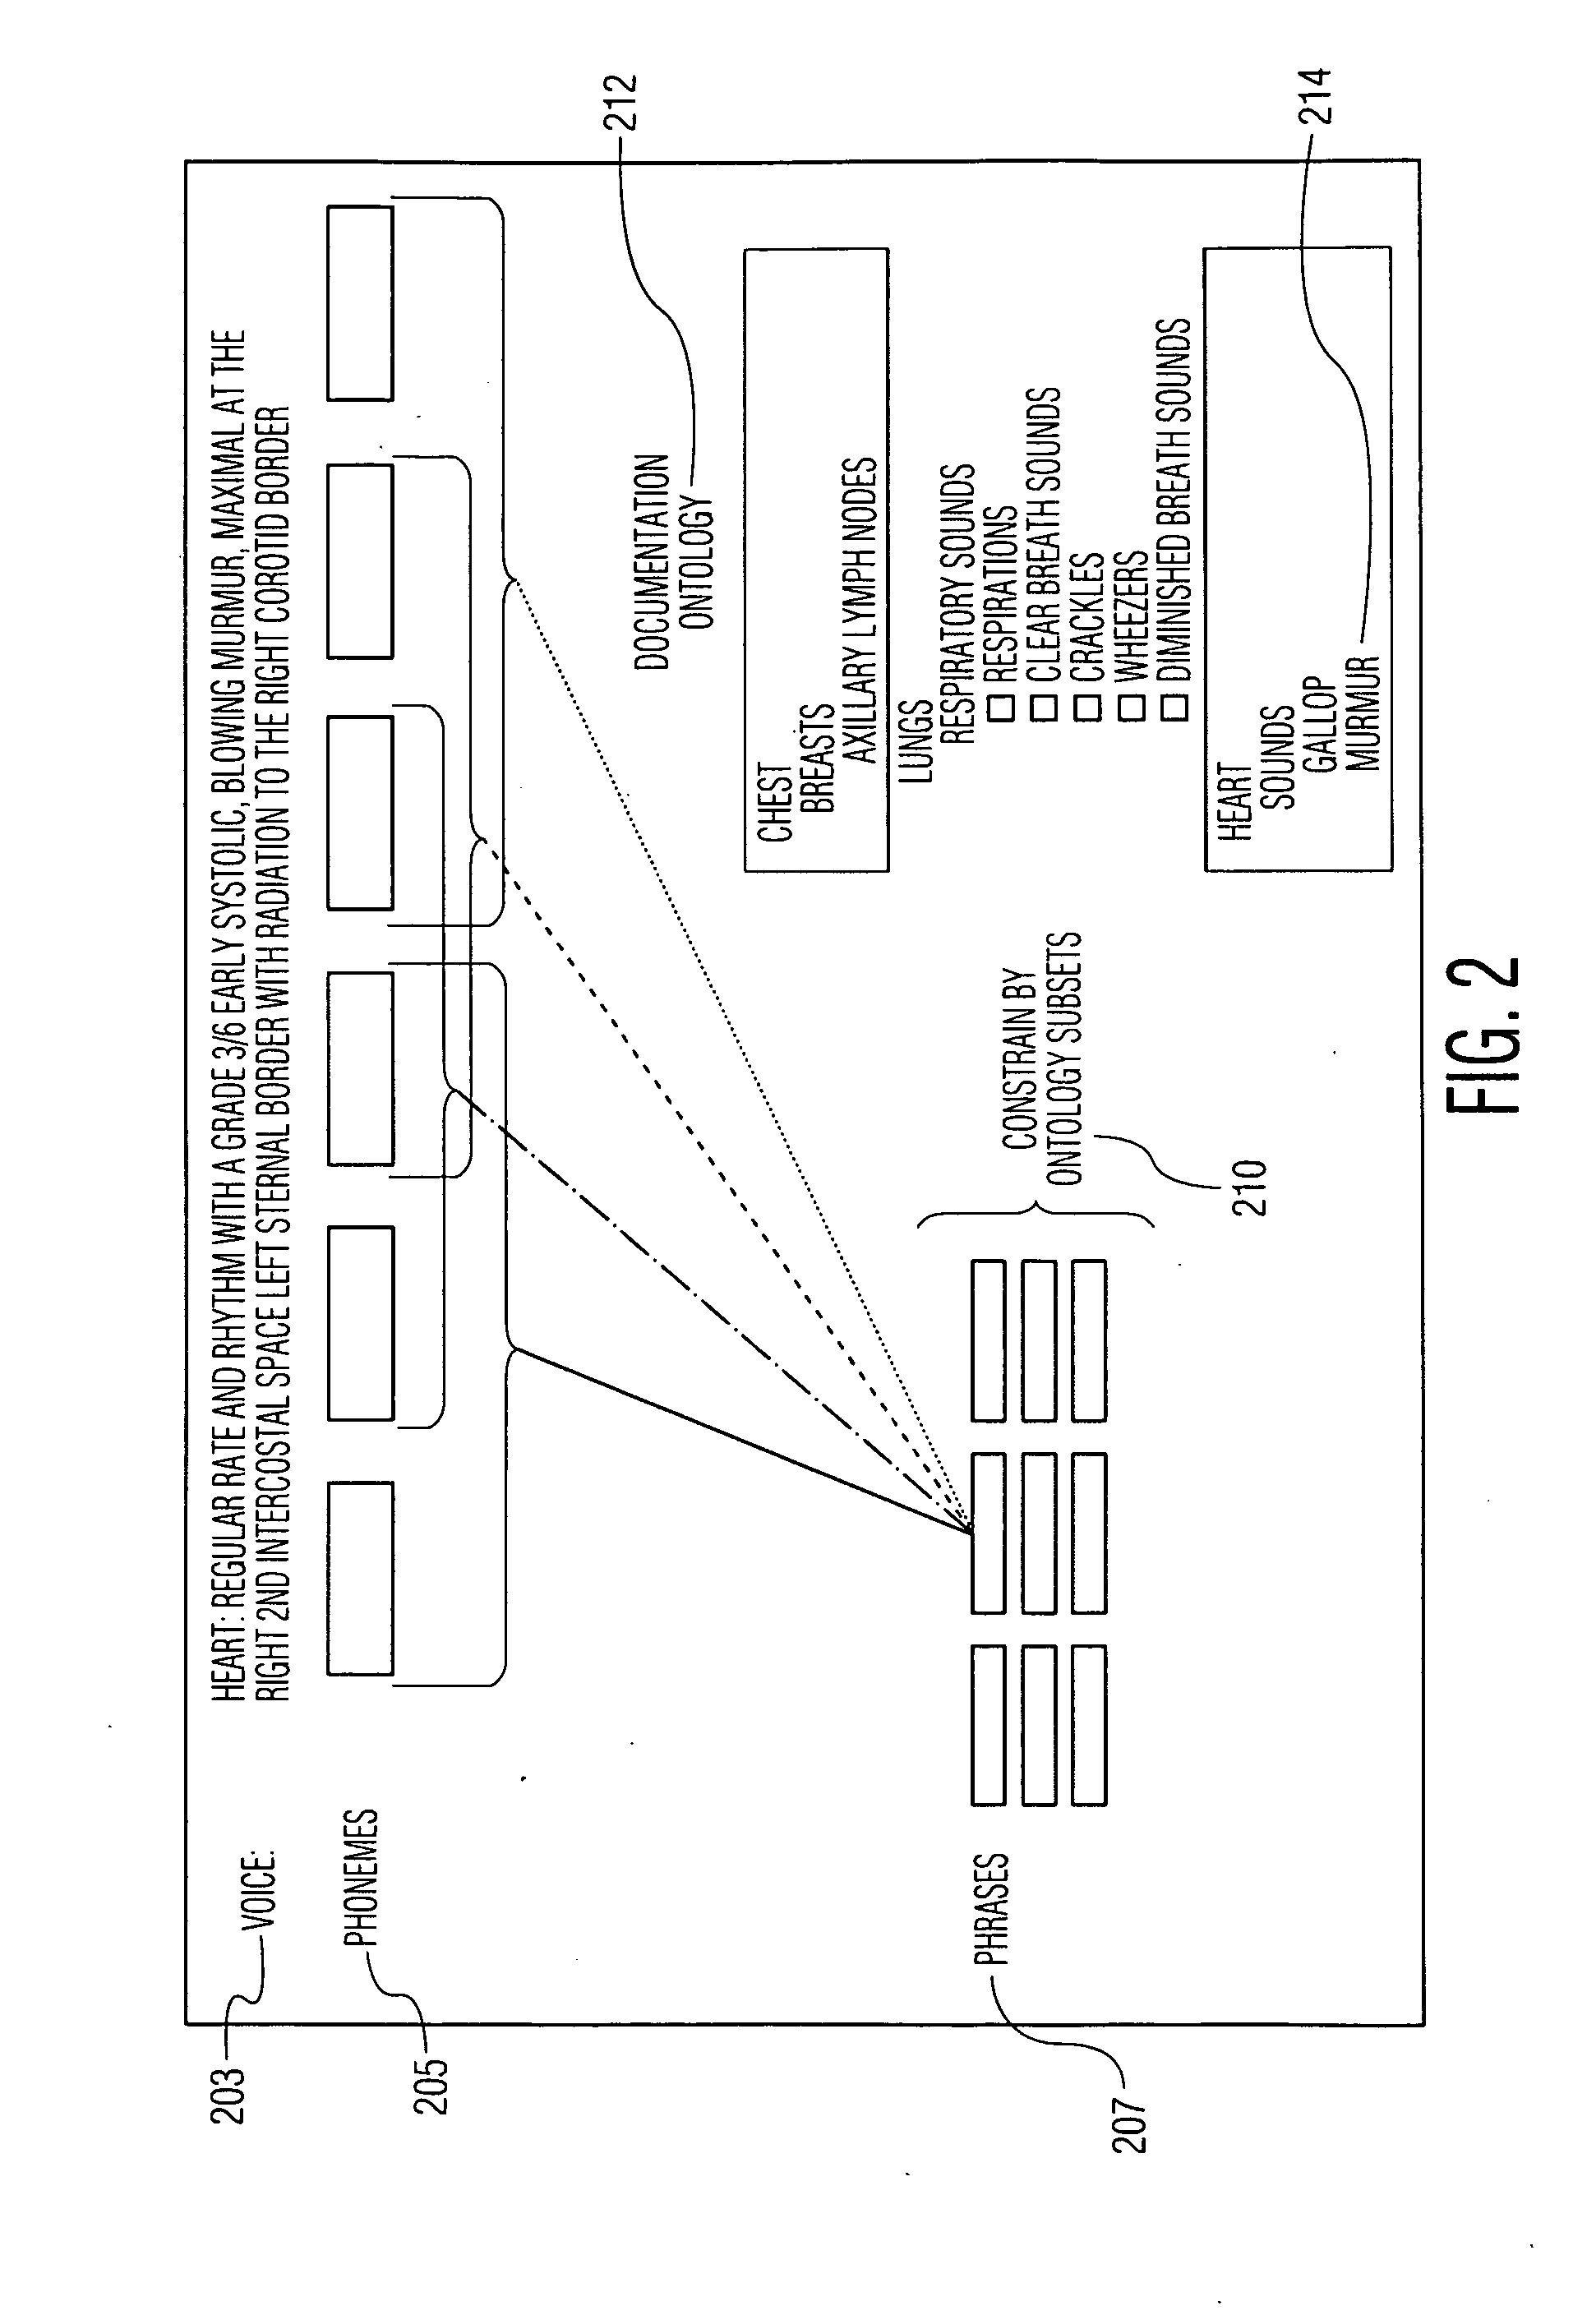 Medical Ontology Based Data & Voice Command Processing System